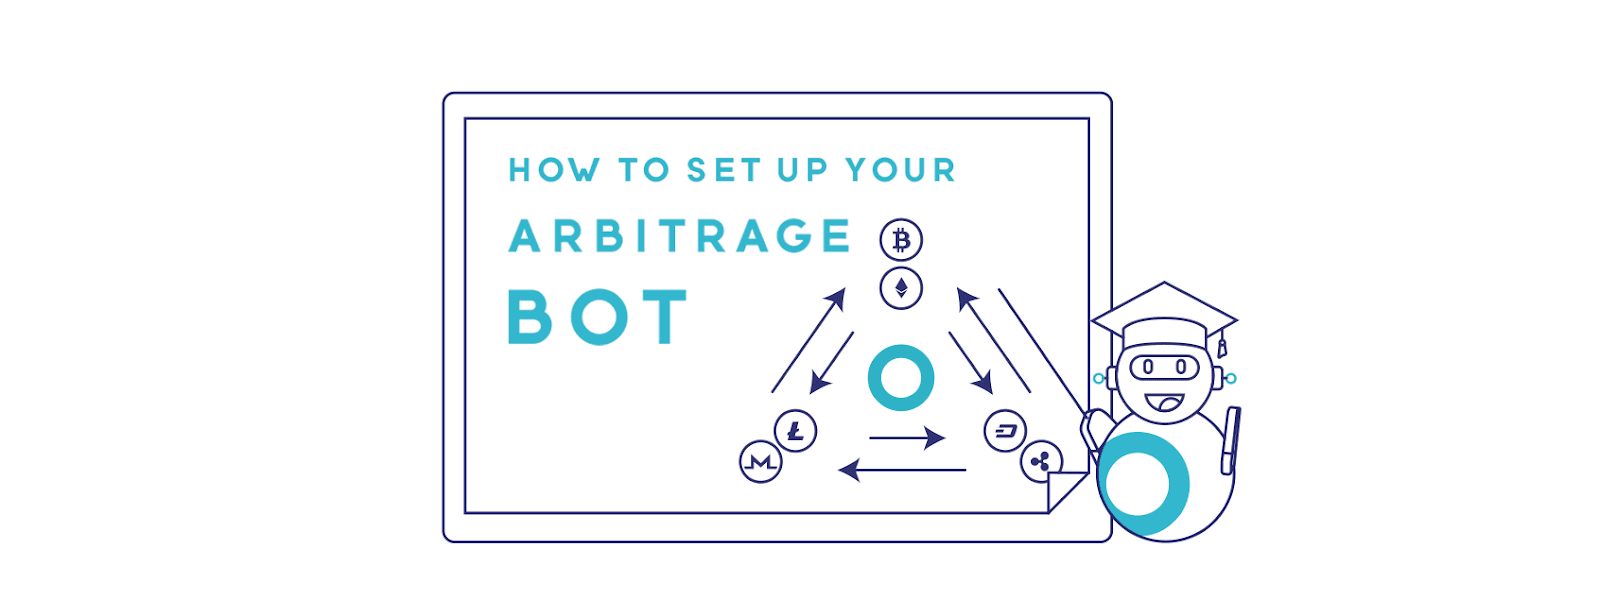 Bot Trading 101 | How To Set Up an Arbitrage Bot